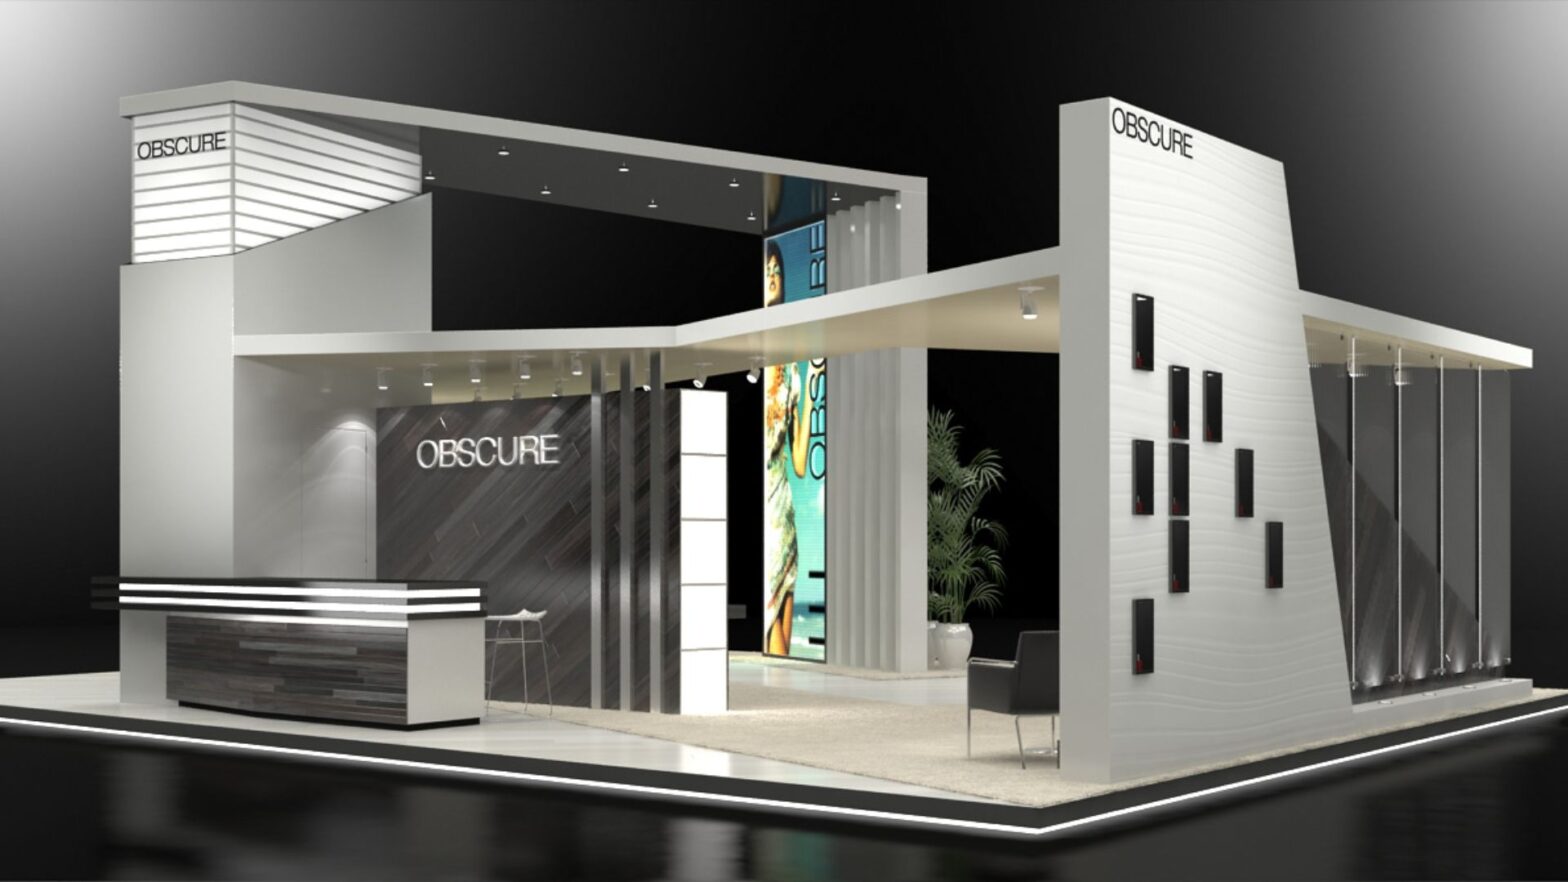 What are Latest Trends in Custom Exhibition Booth Design